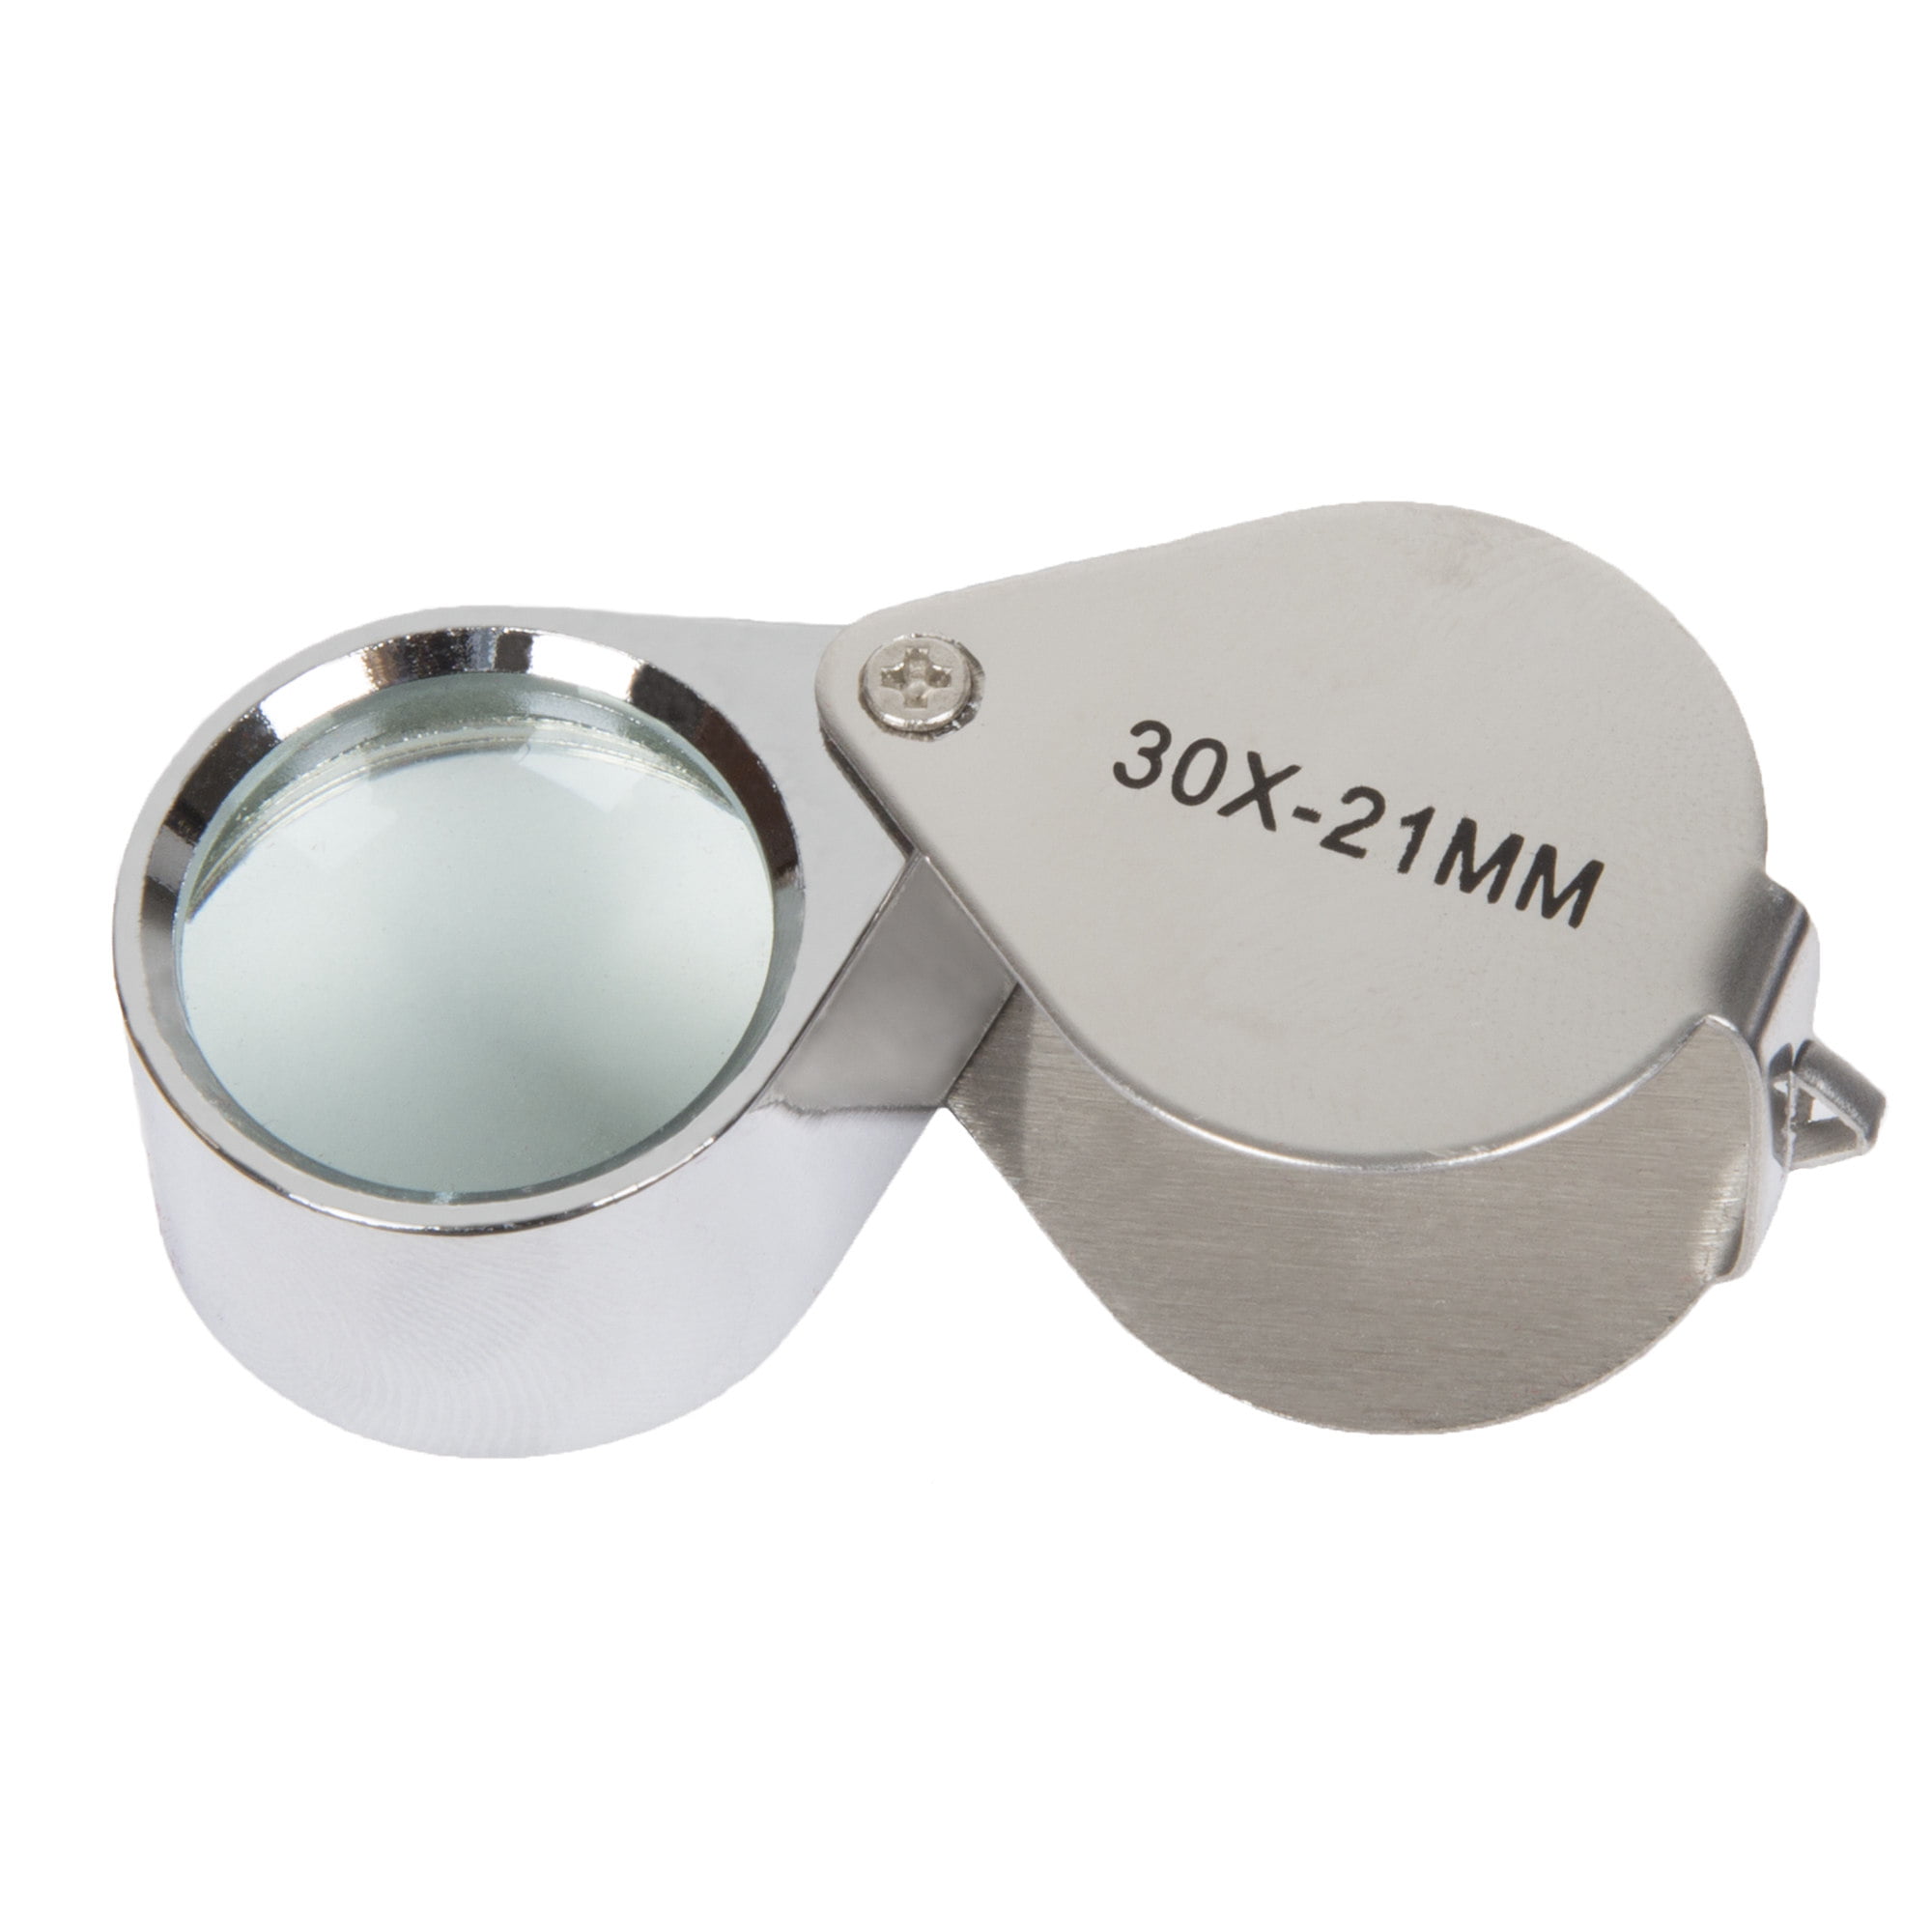 Promotion Gift mini 30x21mm Jewellers Glass Magnifier Metal Pocket Loupe 